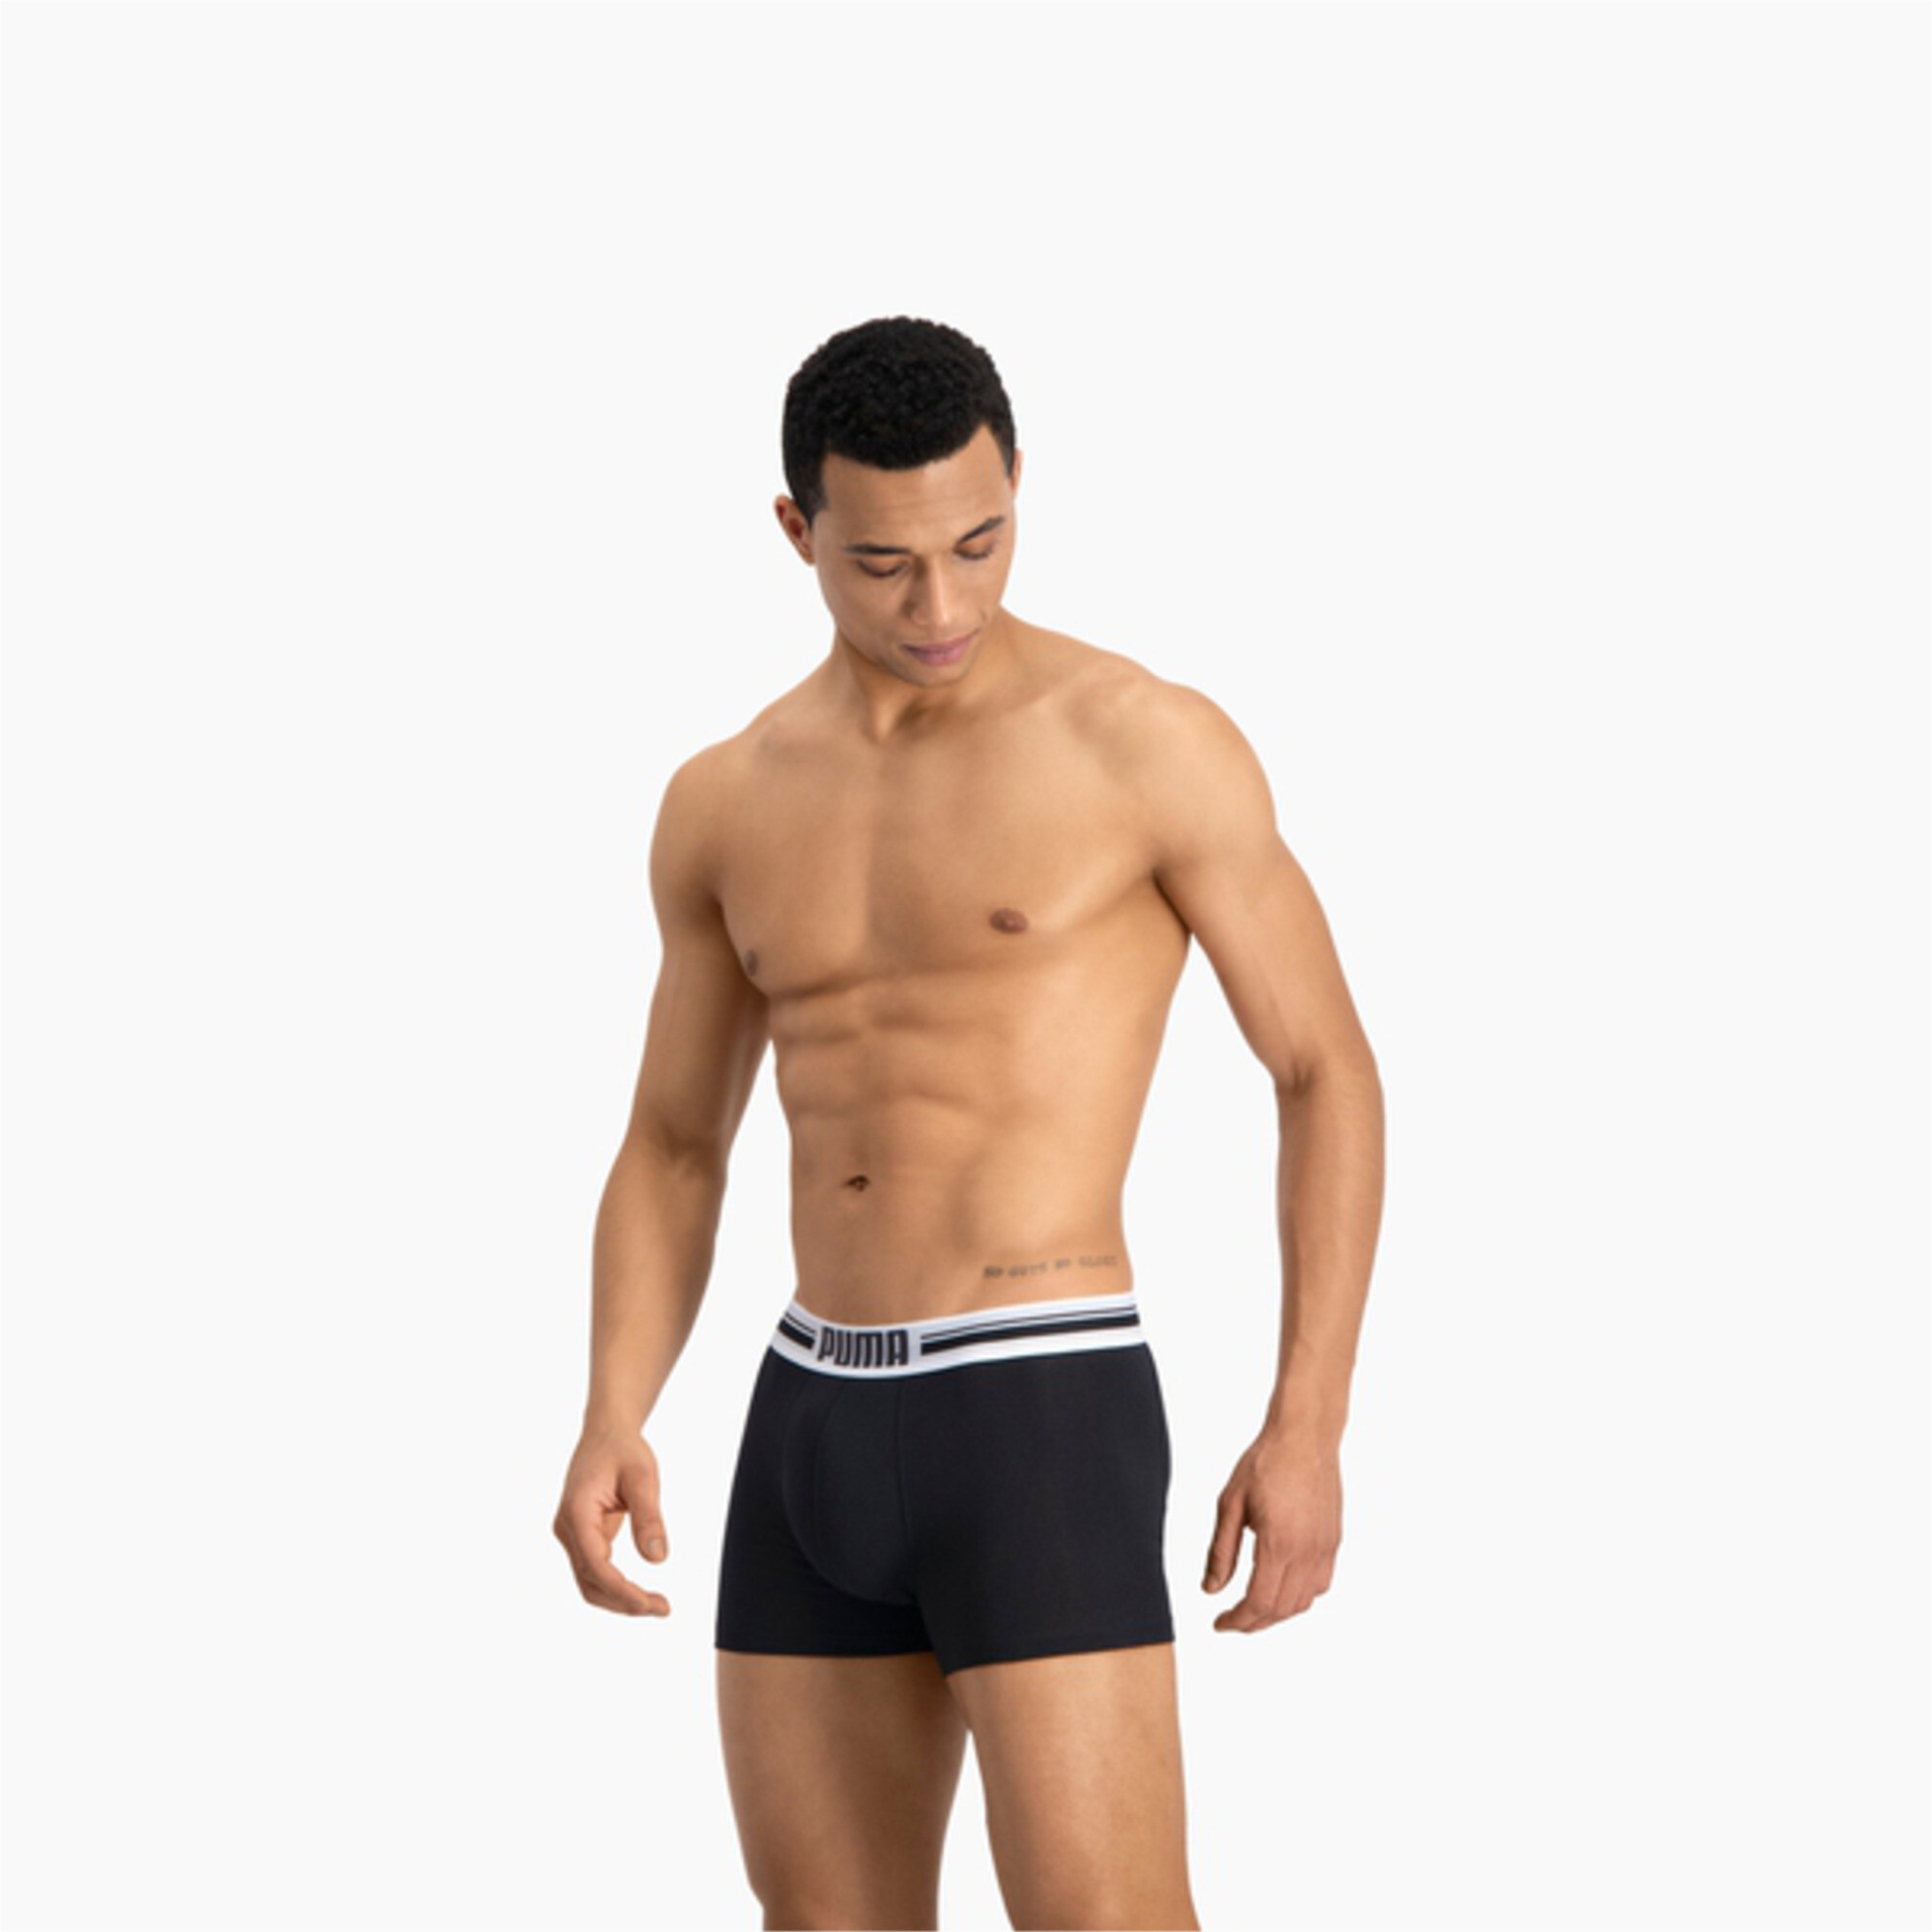 Men's PUMA Placed Logo Boxers 2 Pack In 10 - Black, Size XL